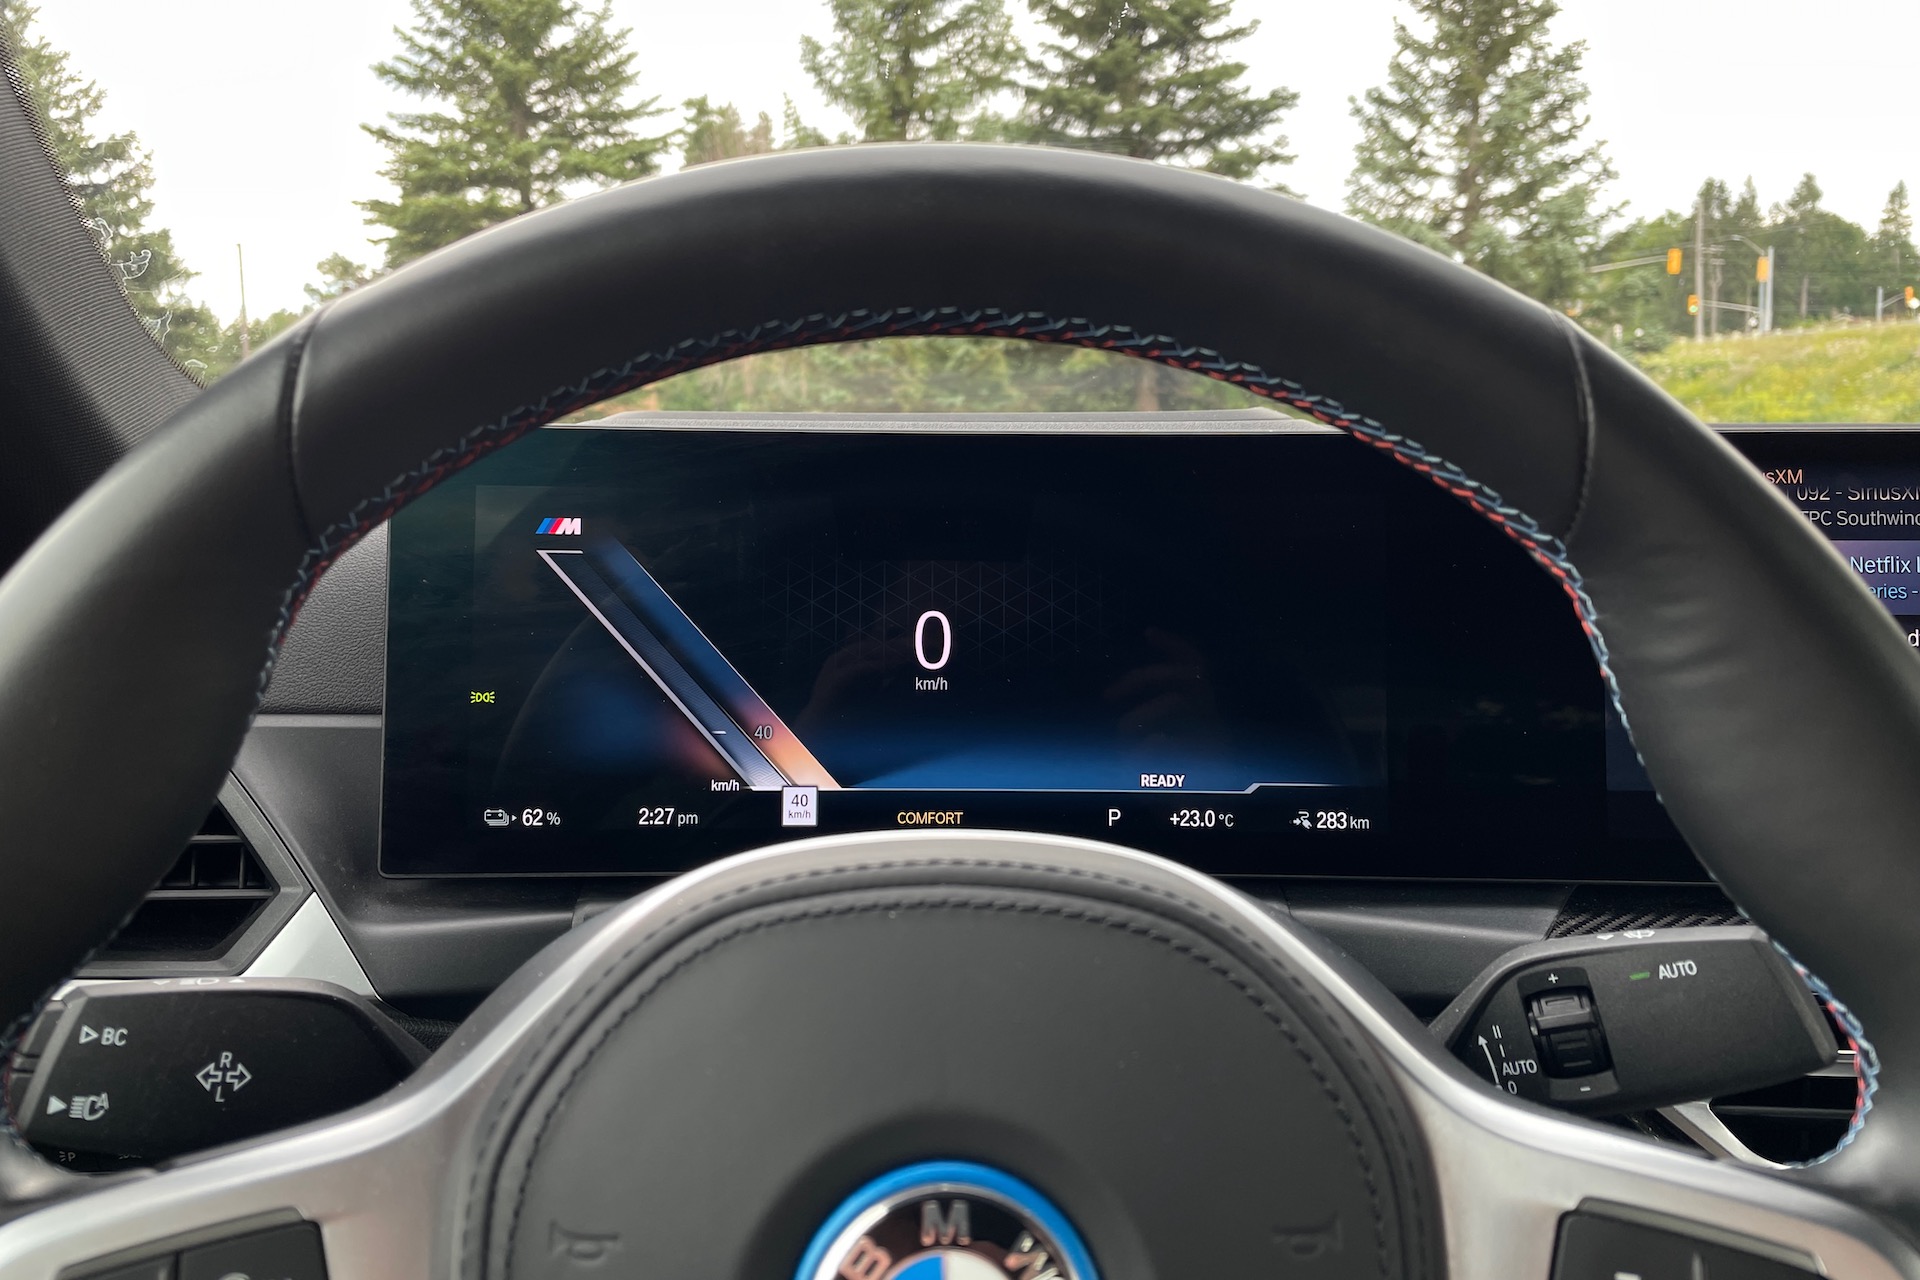 BMW iDrive 8 Infotainment Review: Looks Good but Missing Some